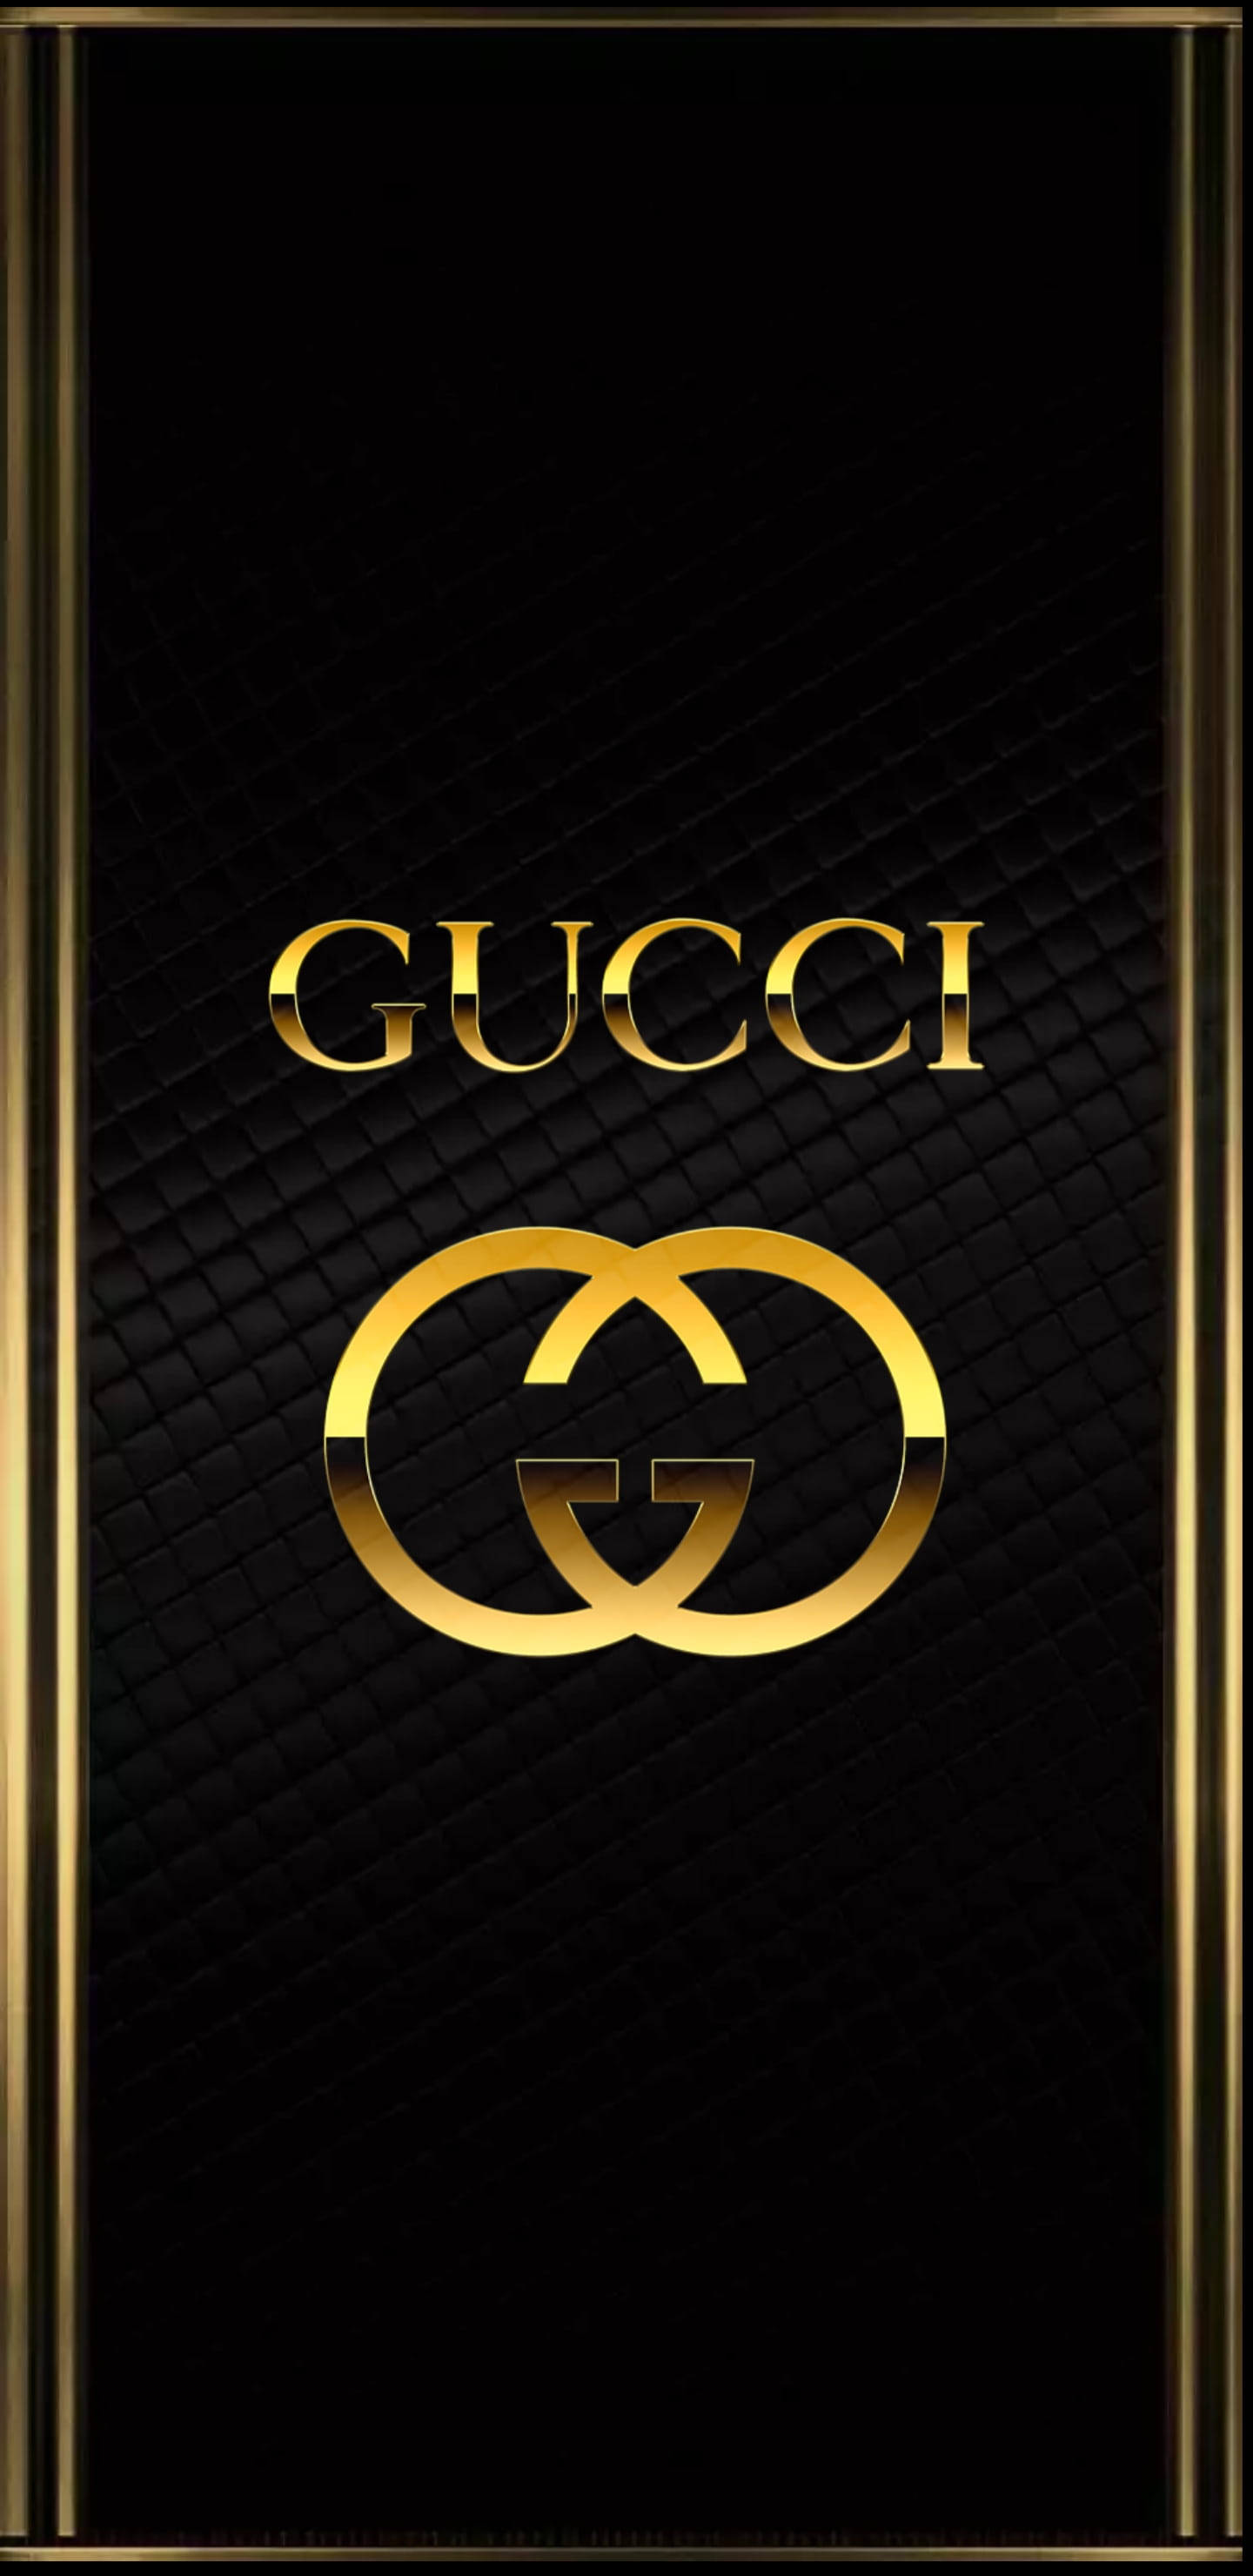 Download Gold Gucci Iphone Wallpaper